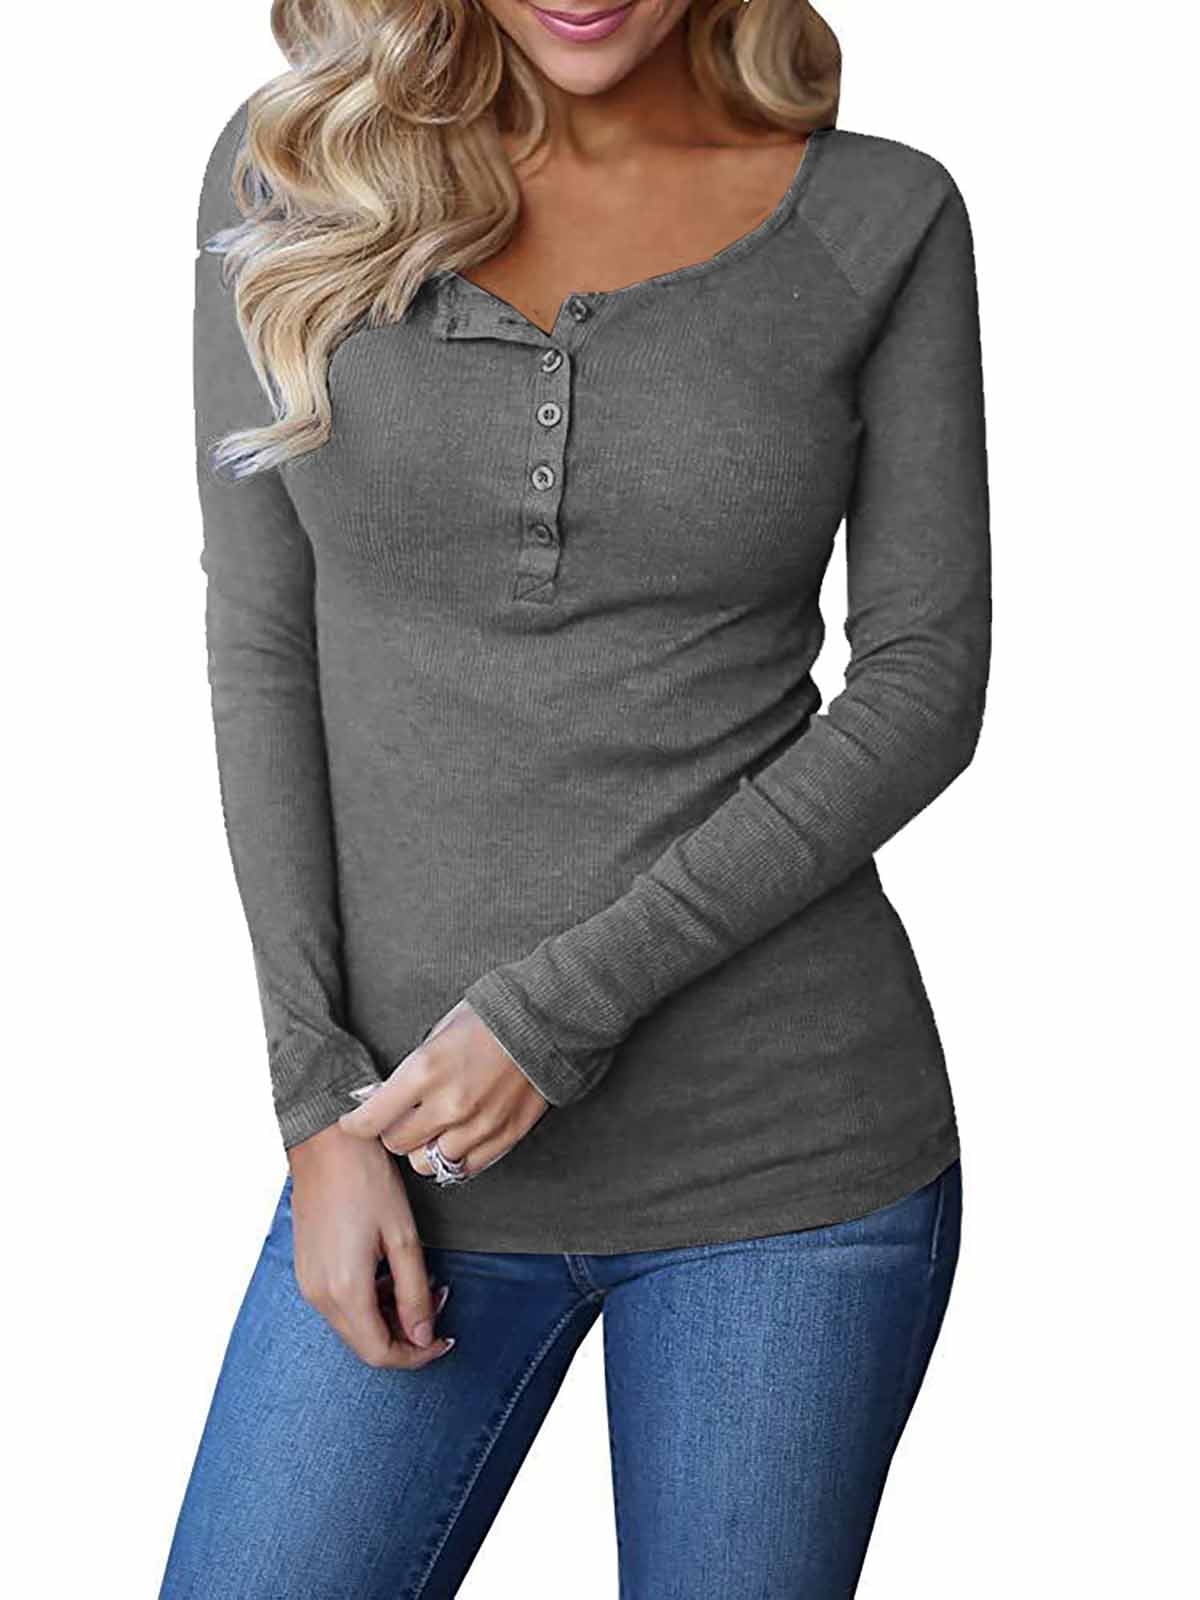 Ybenlow Womens Long Sleeve Henley Shirts Ribbed Button Down Casual ...